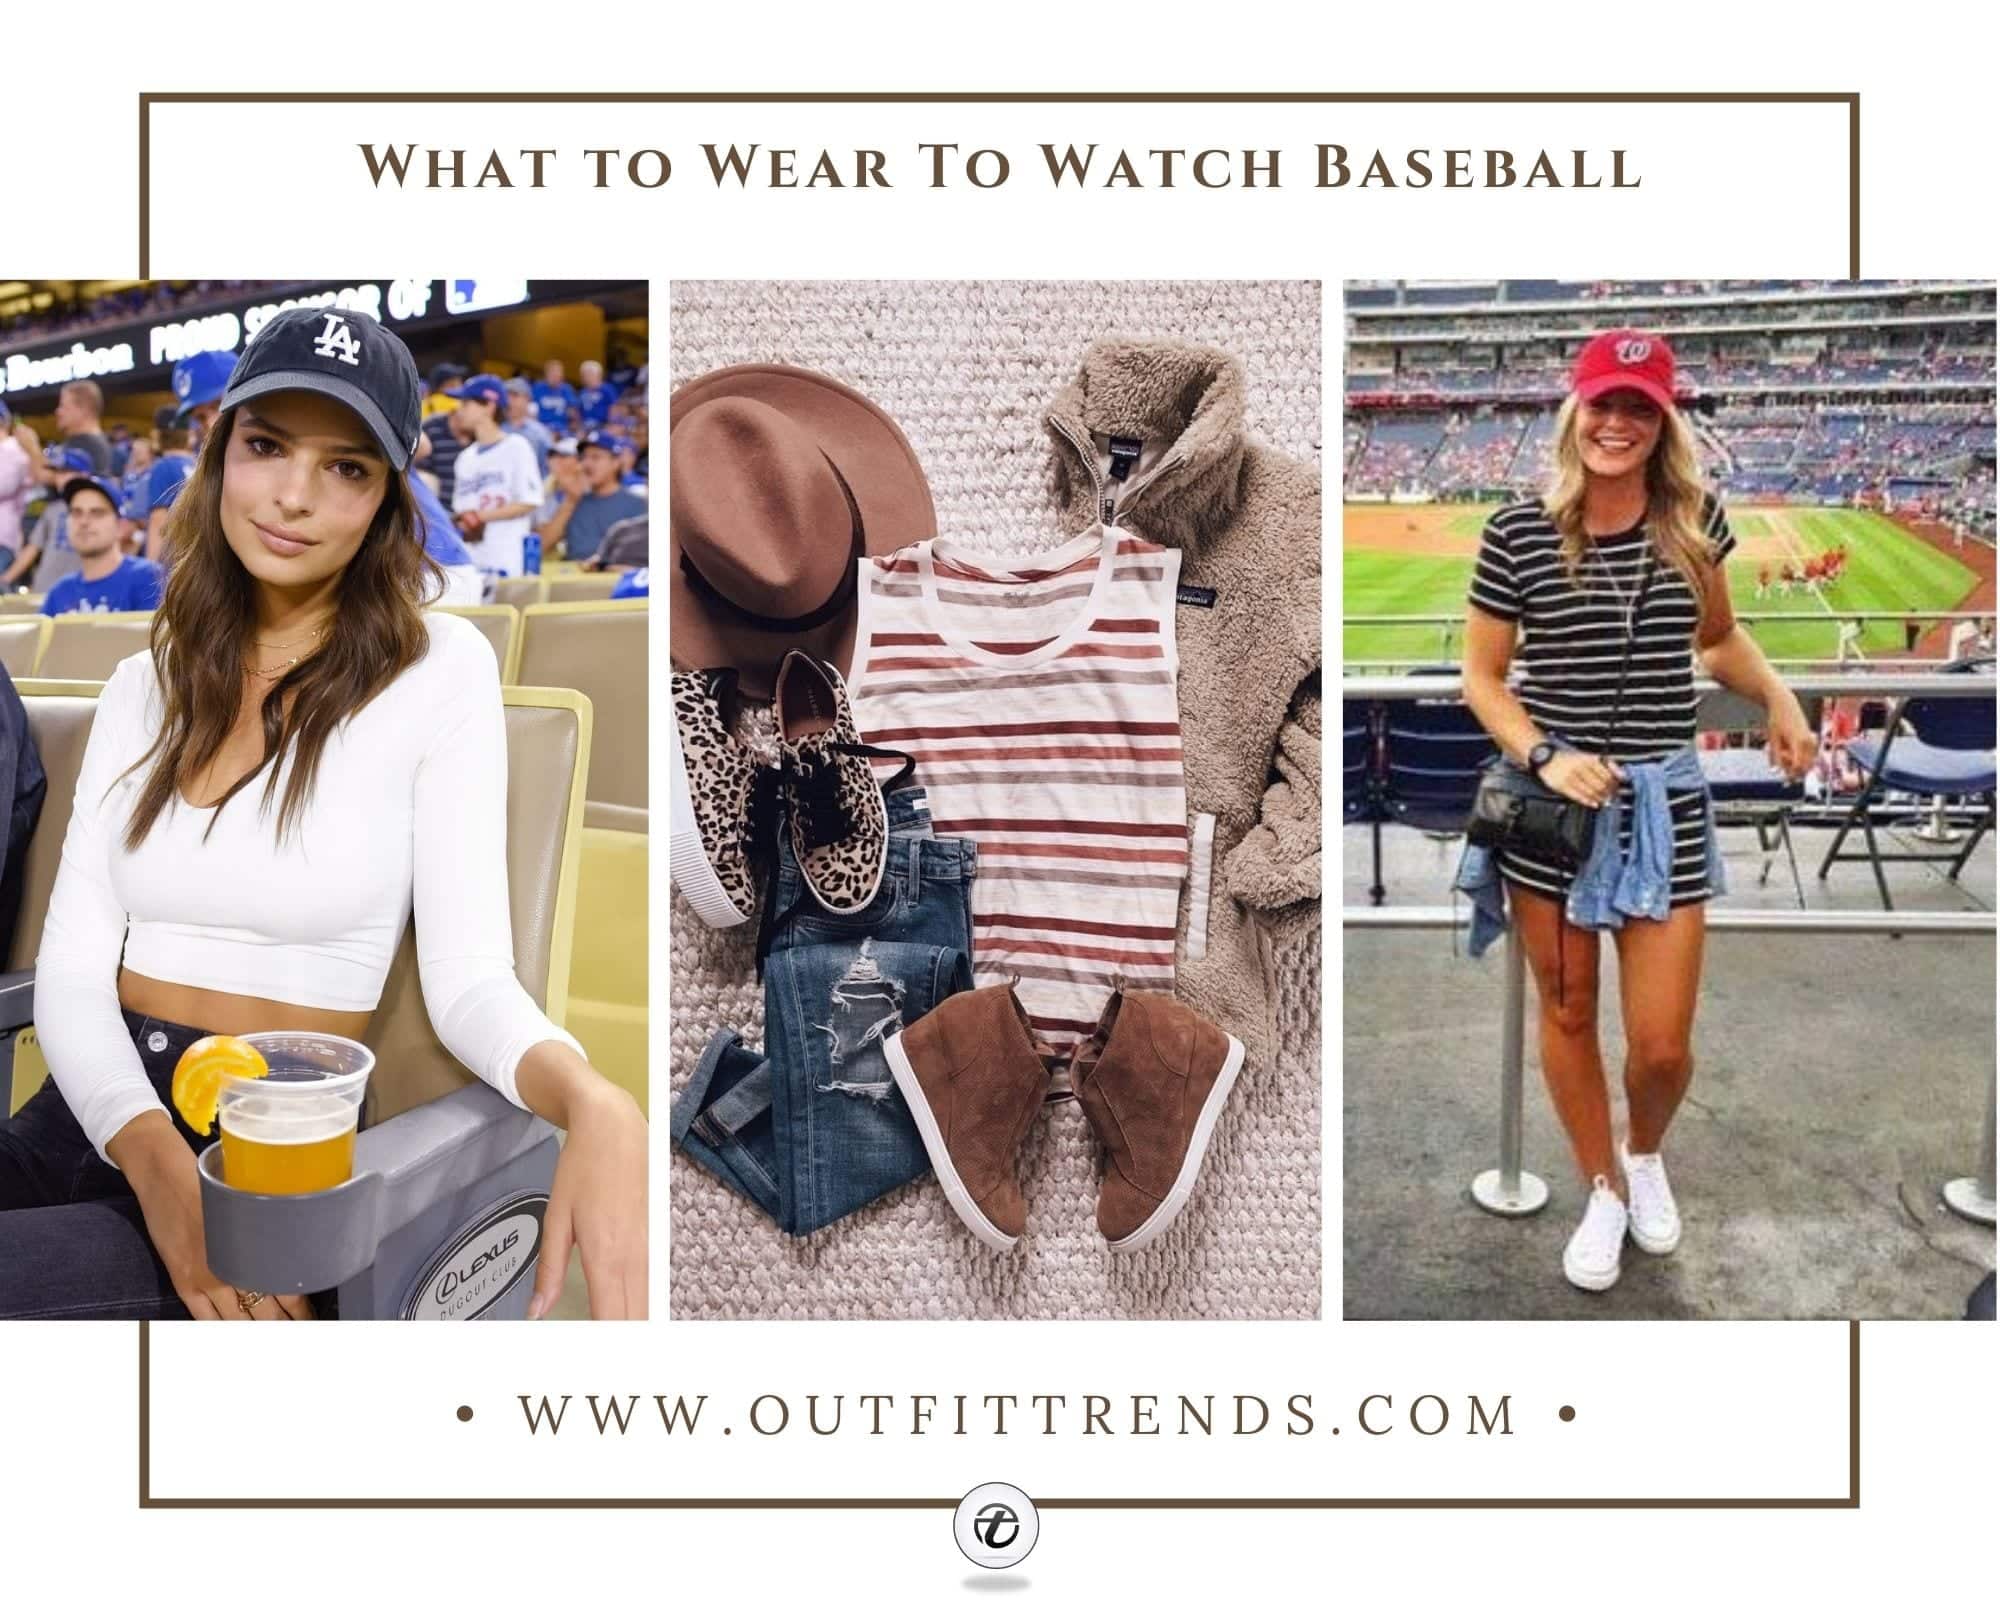 yankee game outfit ideas